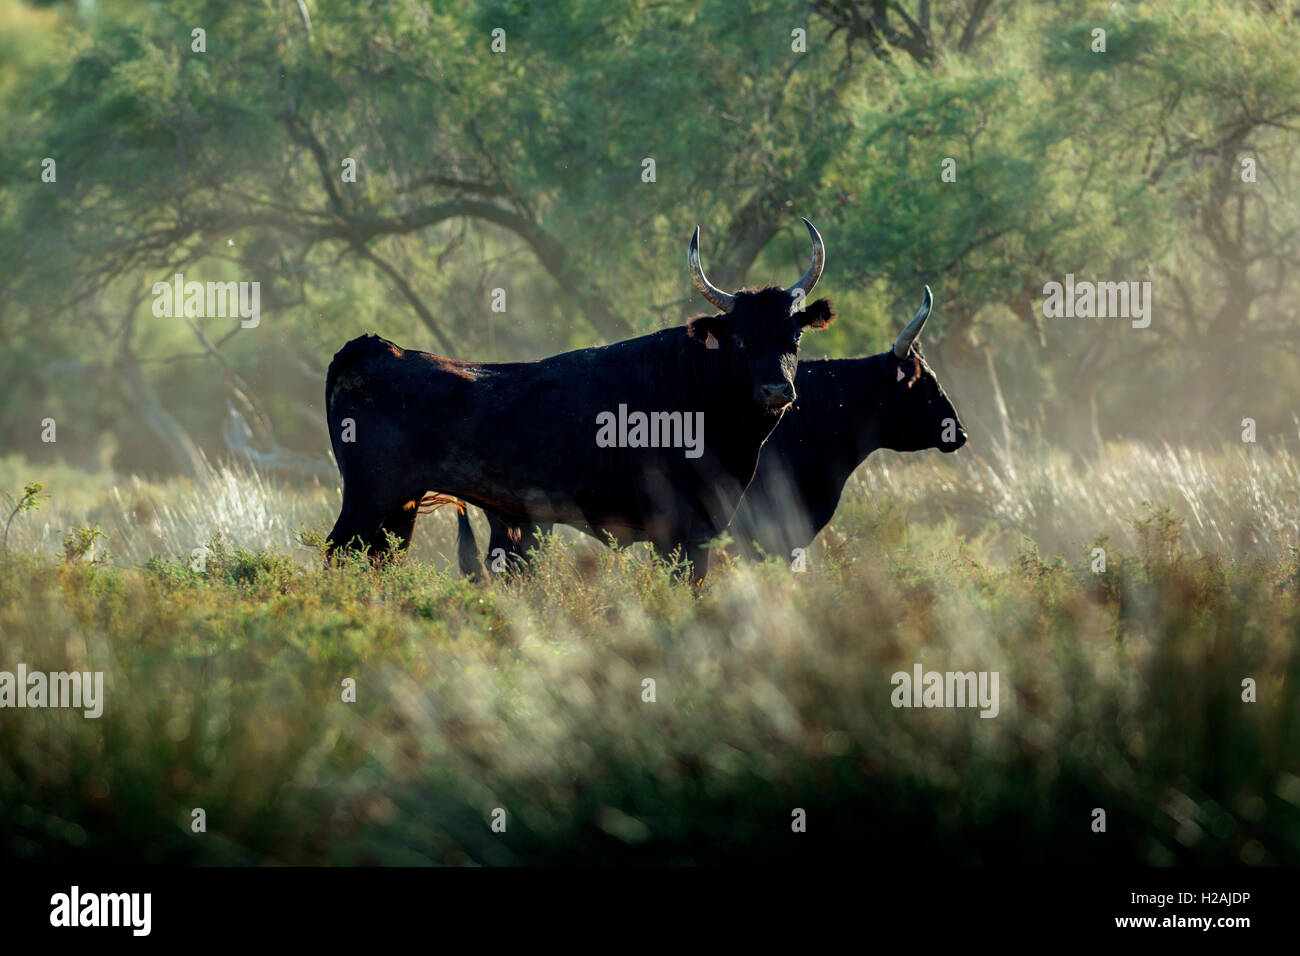 Bulls in the Camargue, France Stock Photo